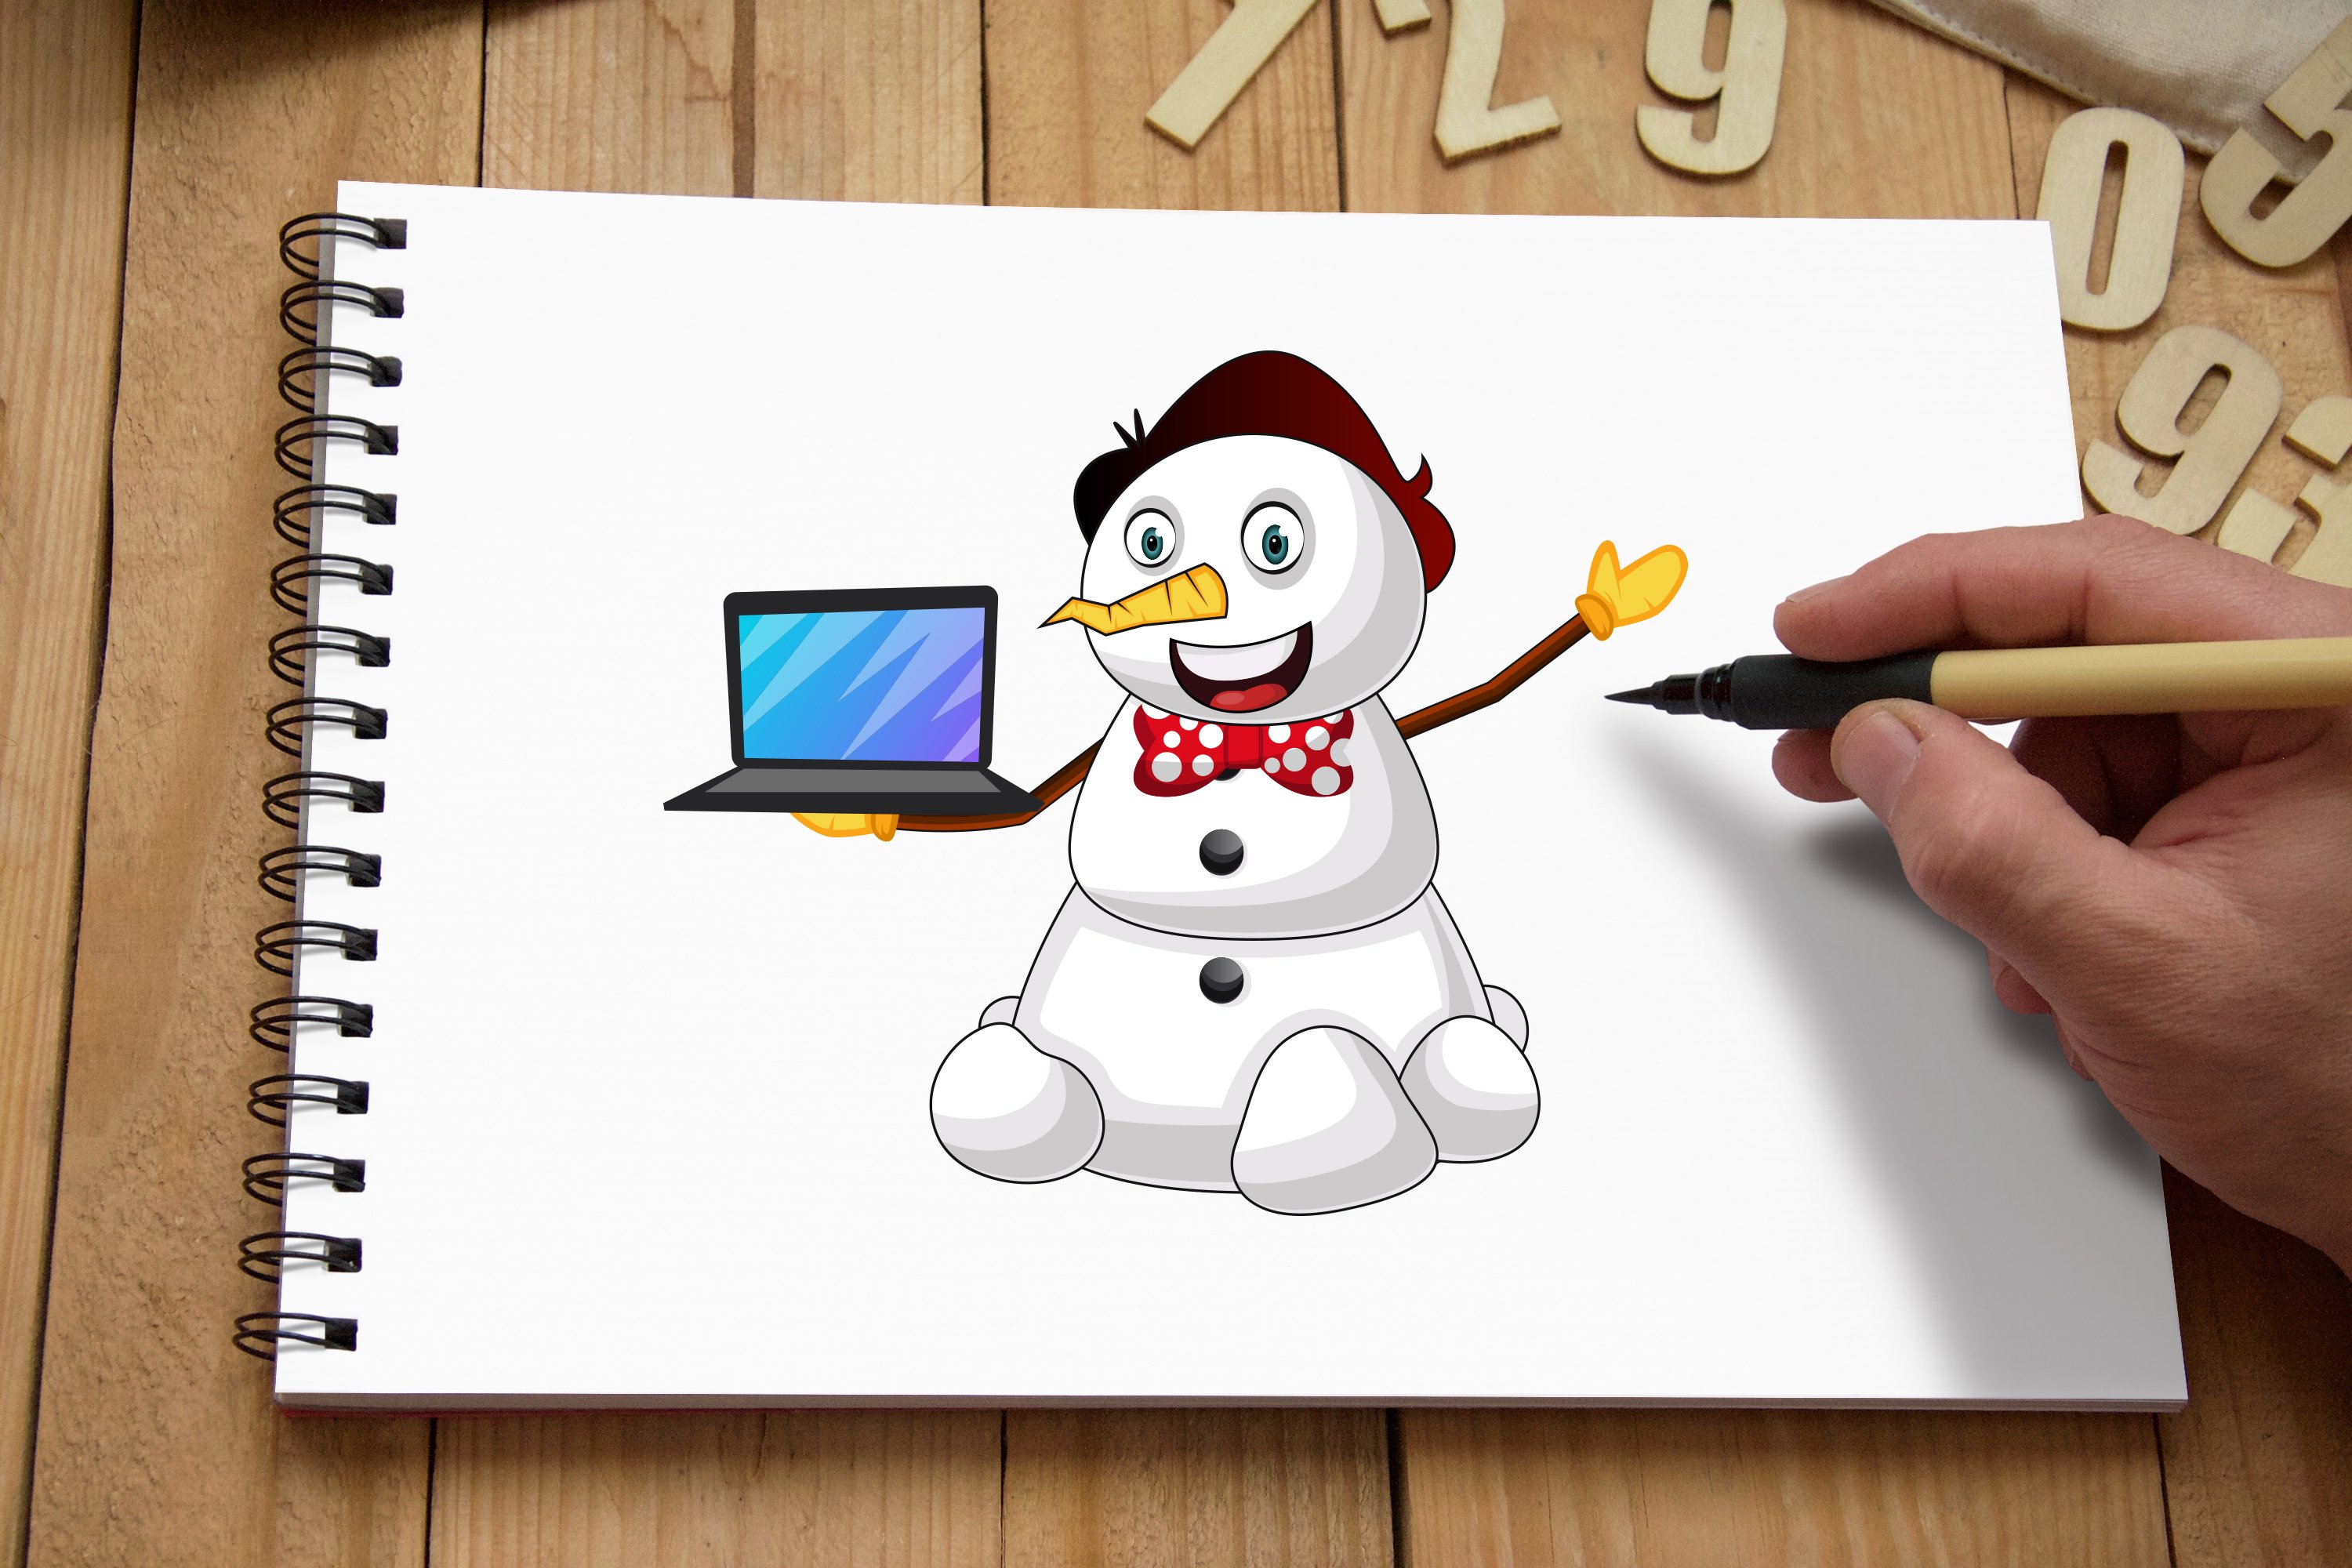 Image of a cheerful snowman on a landscape sheet.